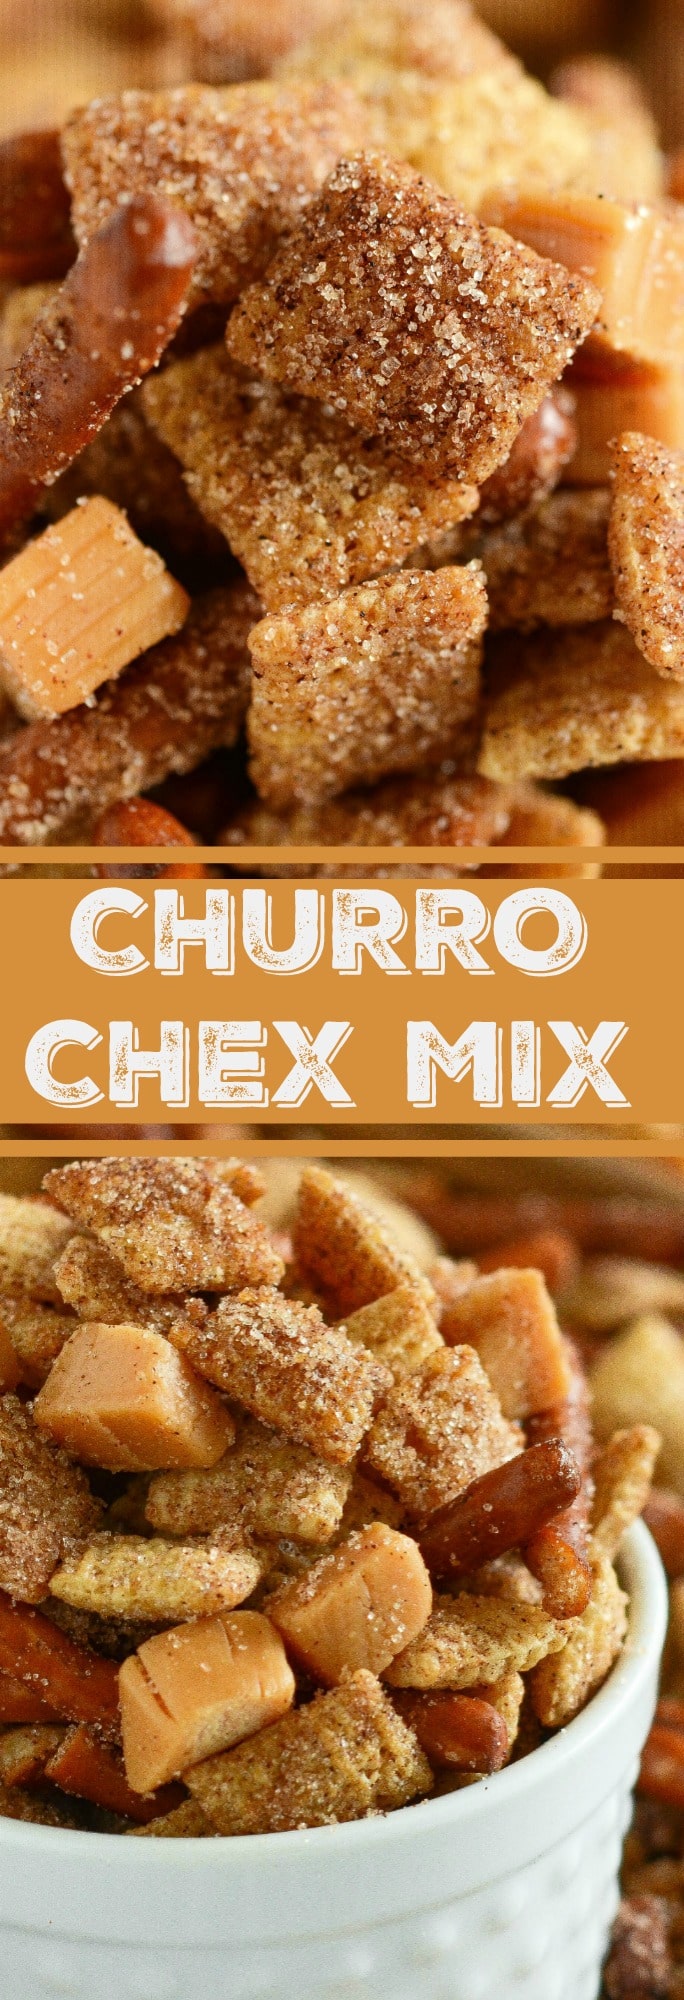 Churro Chex Mix: is absolutely addicting with it’s sweet cinnamon sugar coated chex mix, salted pretzels and caramel bites all mixed together in one bite!